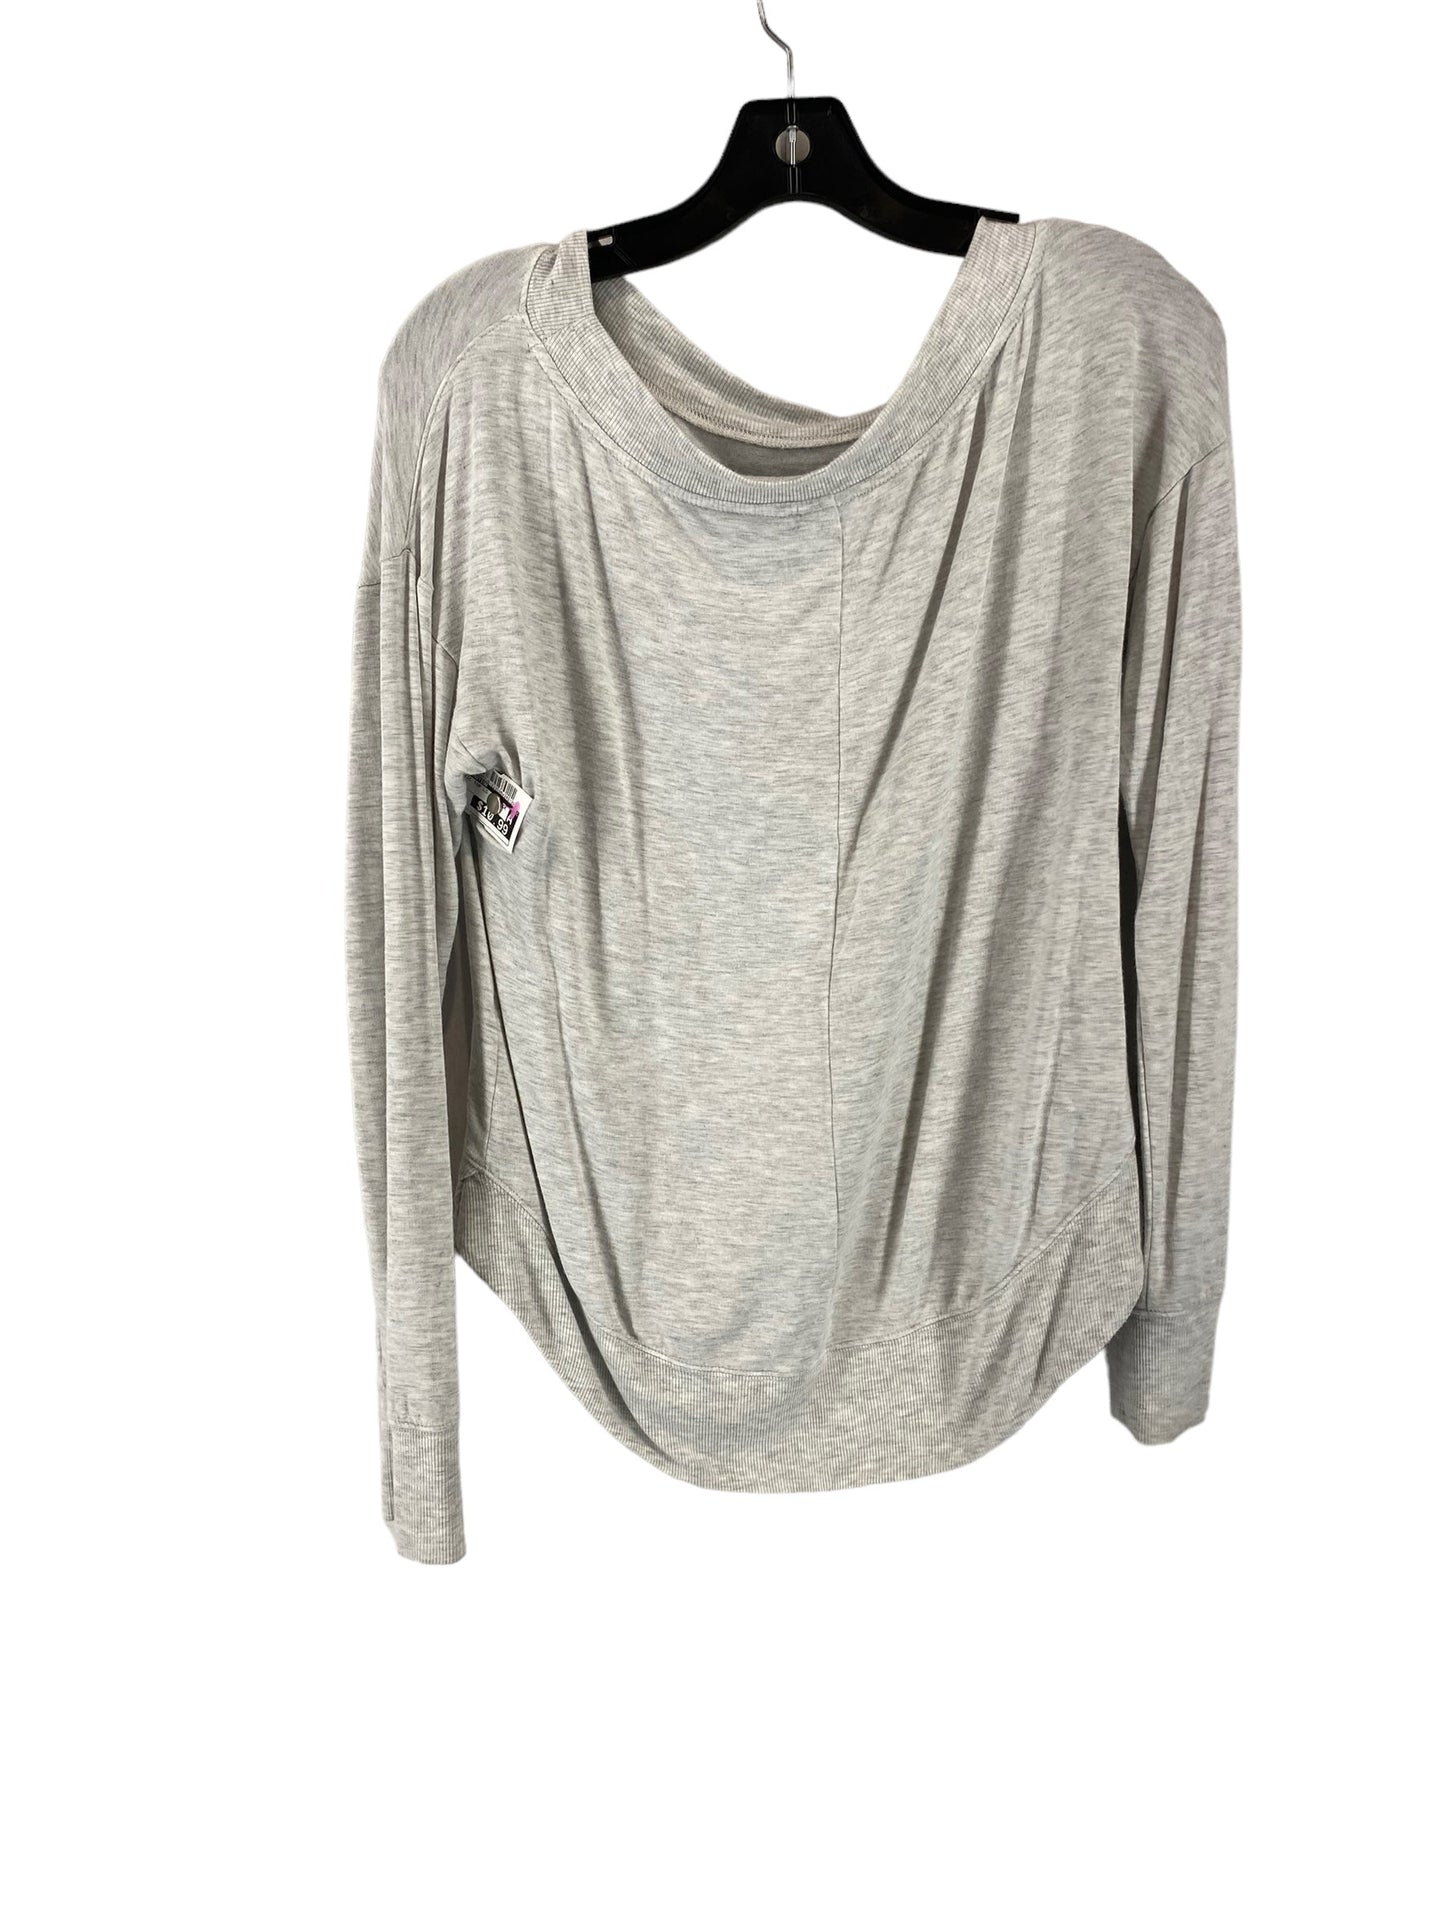 Athletic Top Long Sleeve Crewneck By All In Motion  Size: Xs